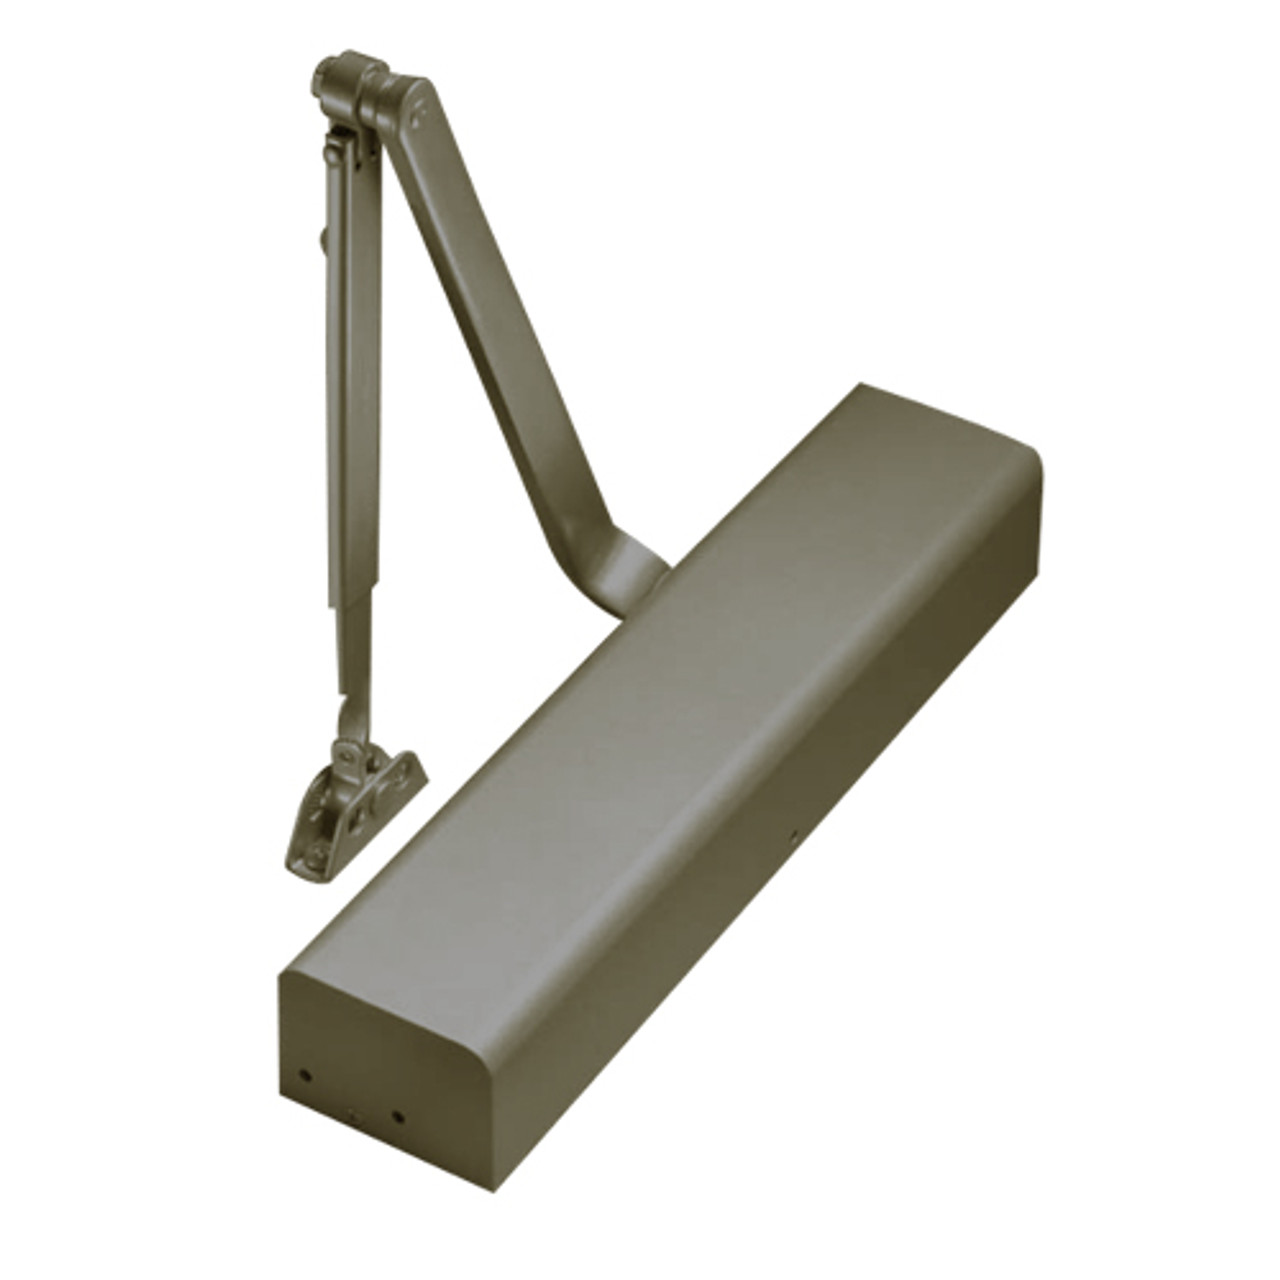 3501-694 Yale 3000 Series Architectural Door Closer with Regular Parallel and Top Jamb to 3" Reveal in Medium Bronze